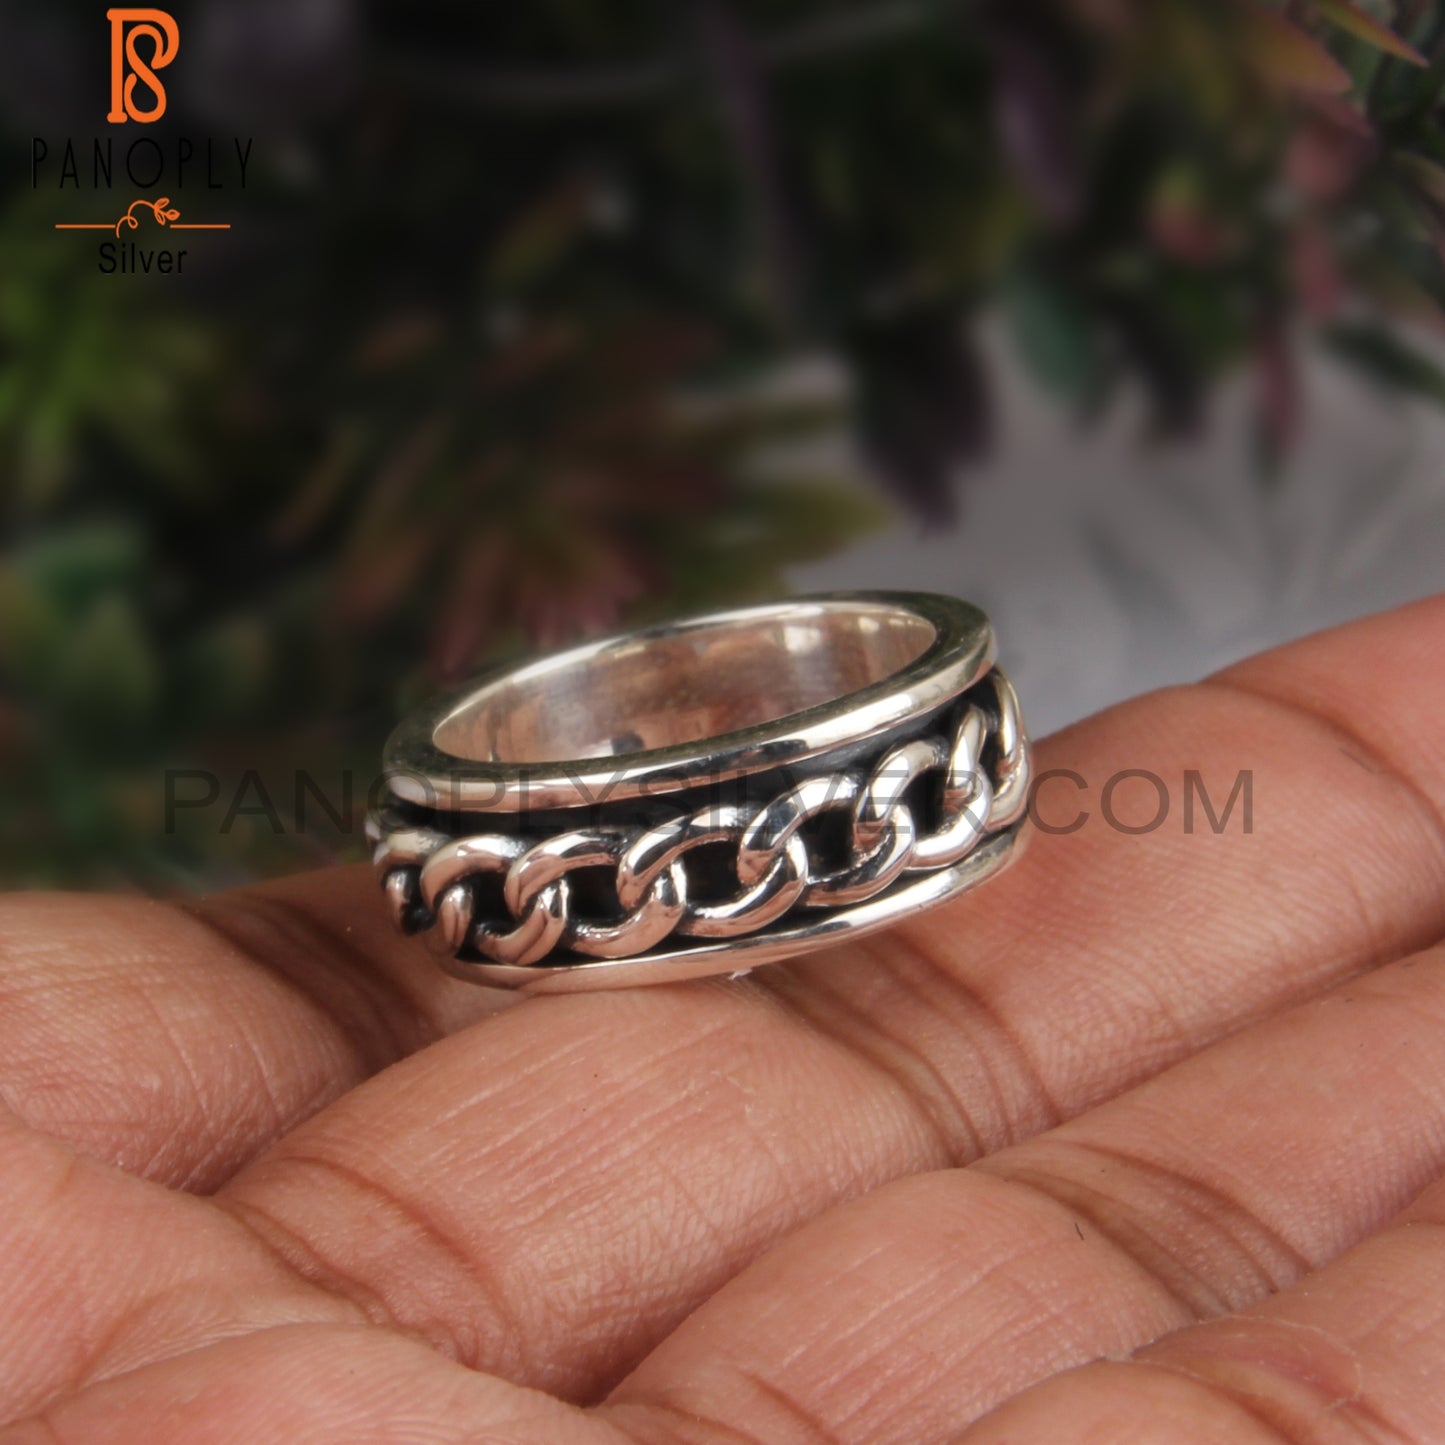 Handmade 925 Sterling Silver Chain Link Ring Band